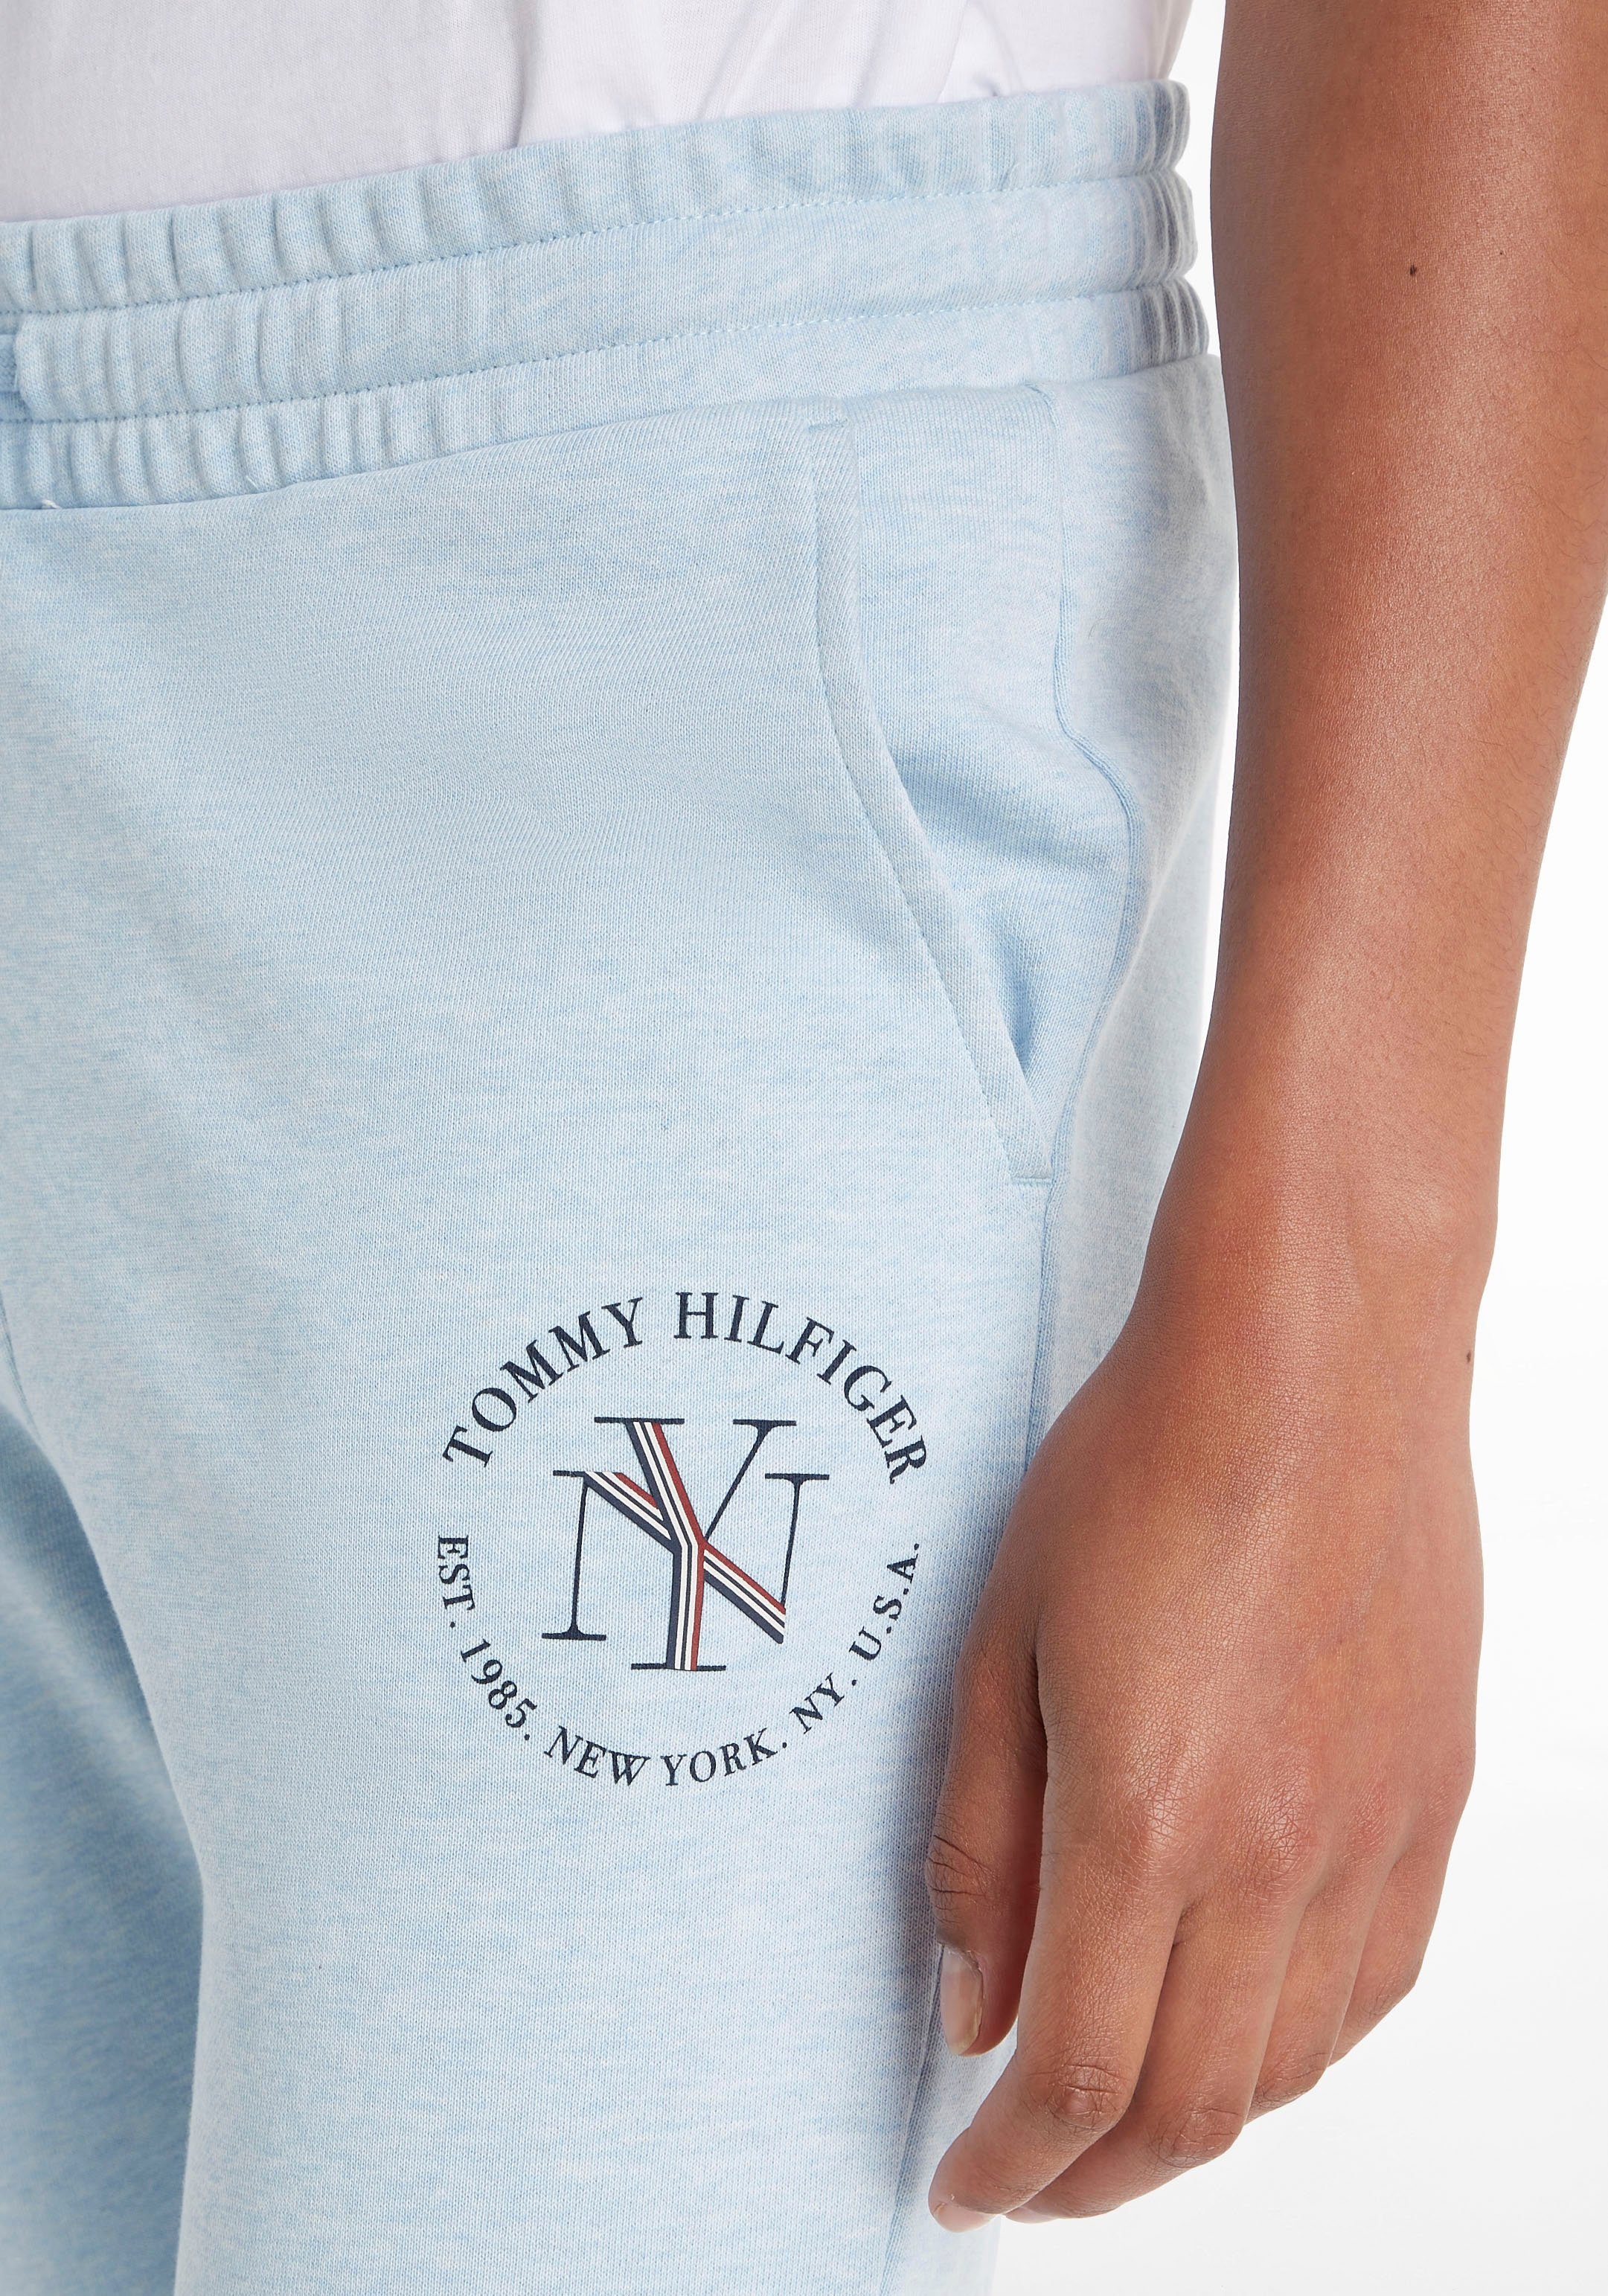 Tommy Hilfiger SWEATPANTS Breezy-Blue-Heather Hilfiger Tommy Sweatpants ROUNDALL Markenlabel mit TAPERED NYC